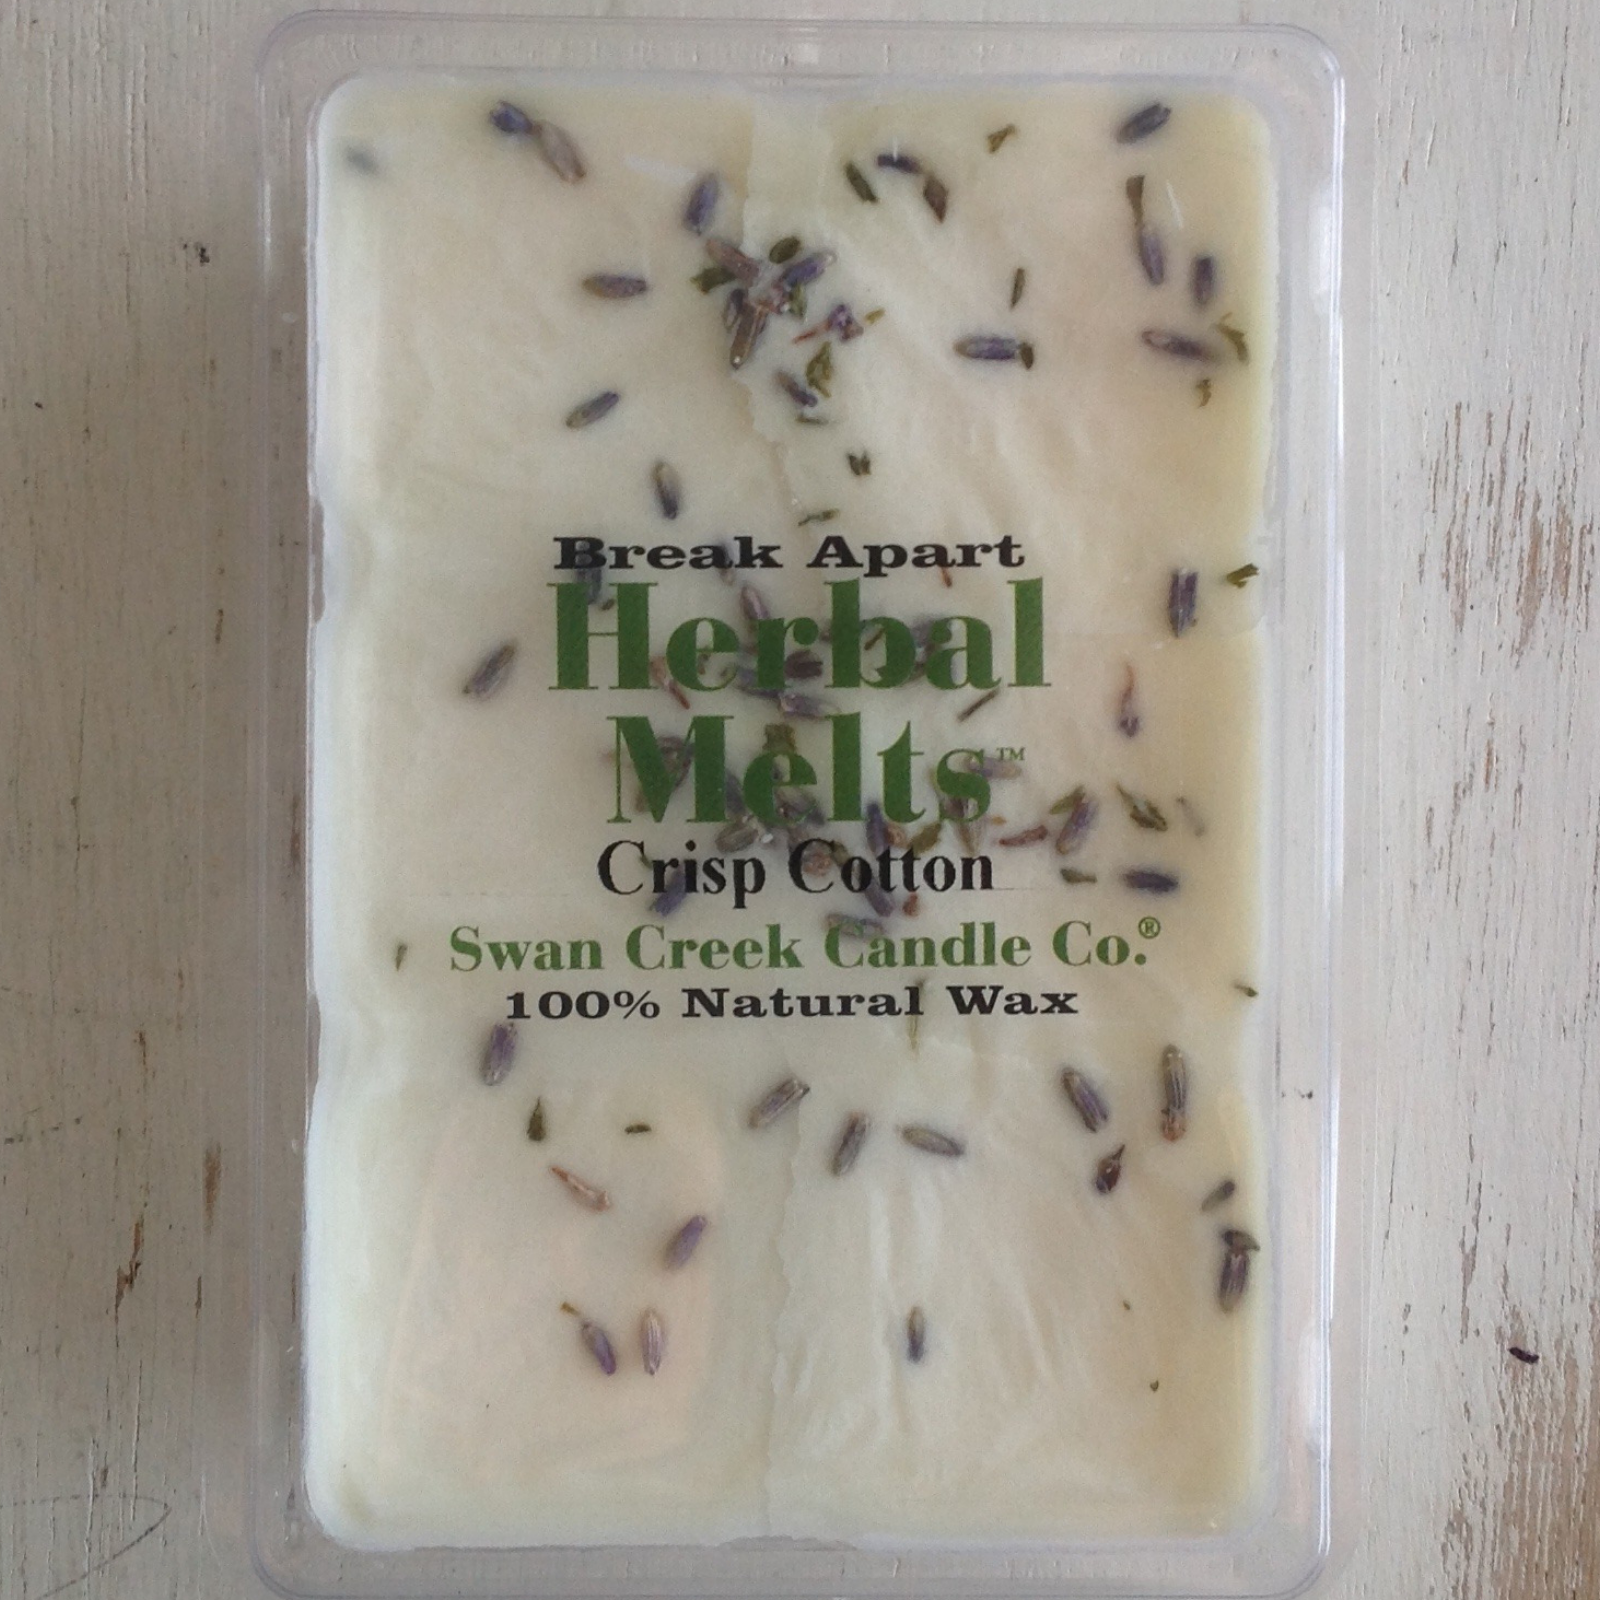 Swan Creek Candle Company Herbal Drizzle Wax Melts Crisp Cotton